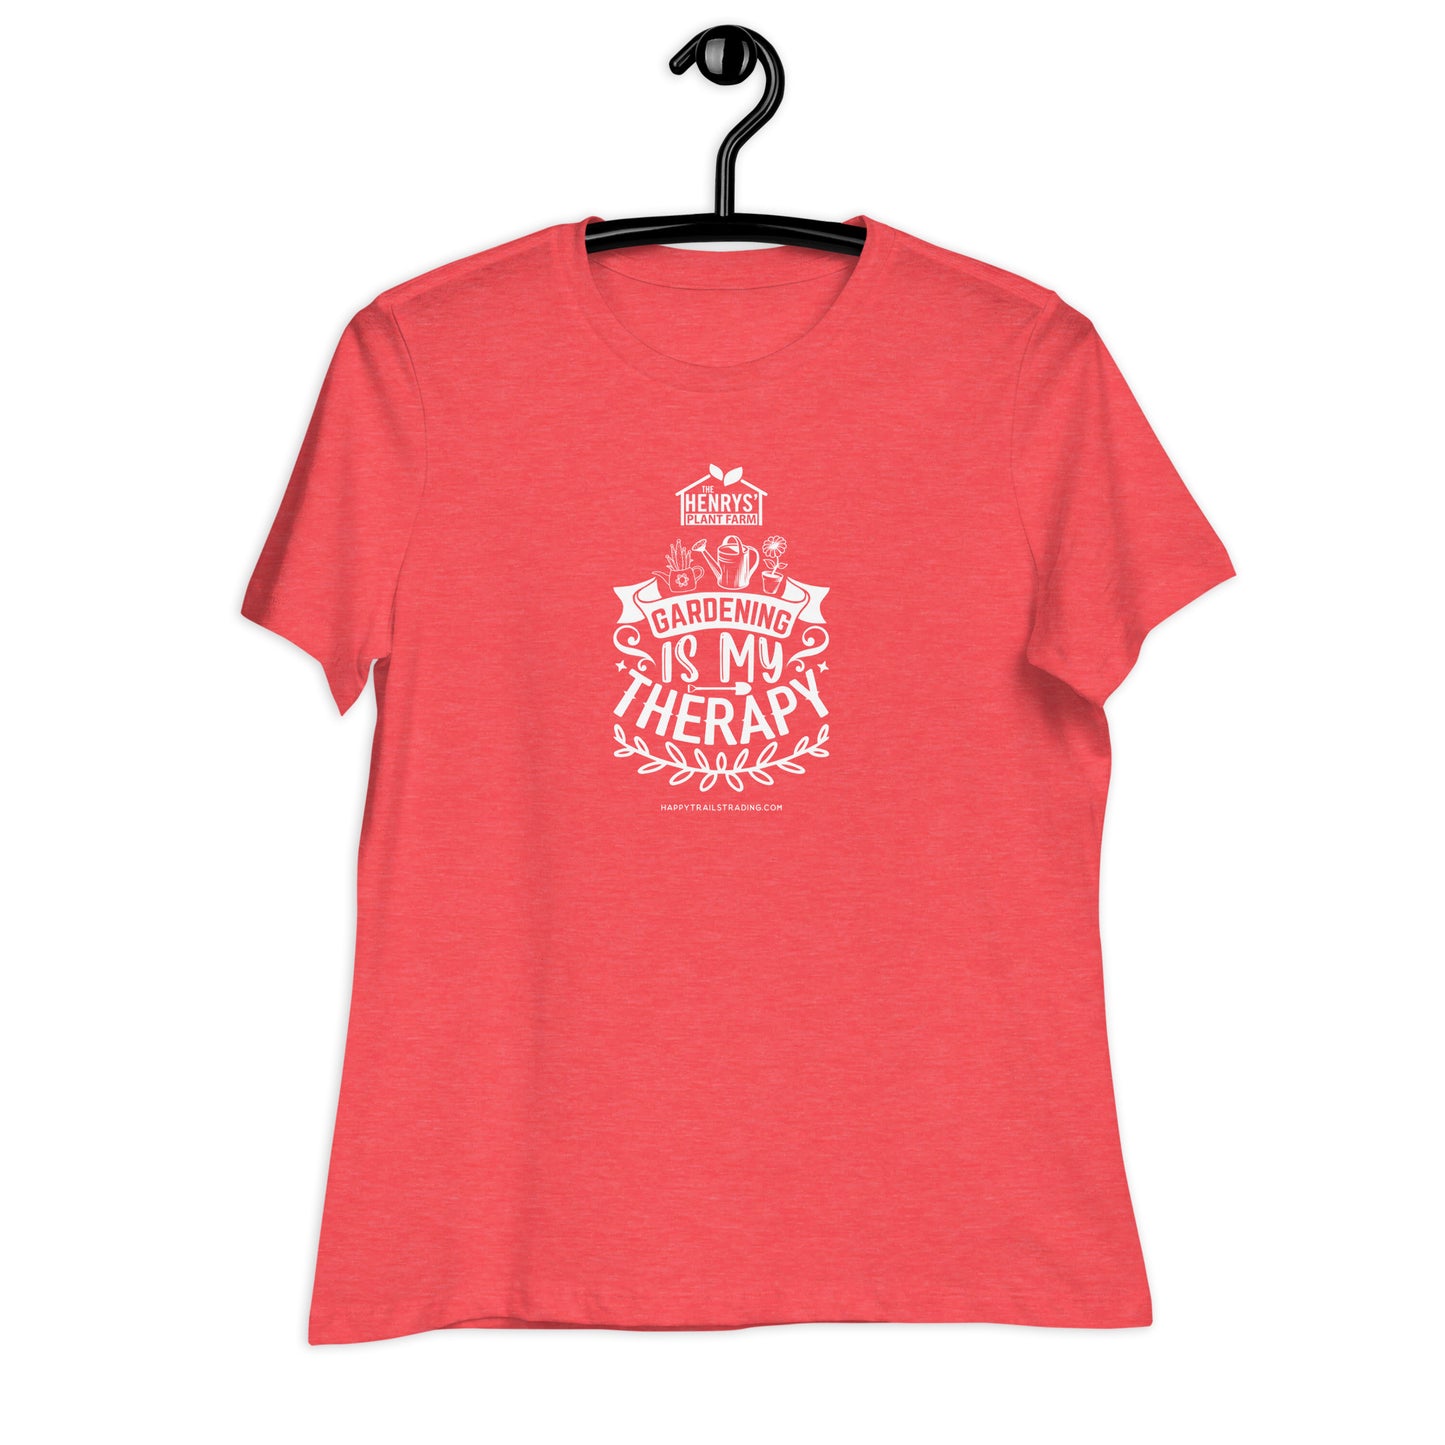 Gardening Therapy - Women's Relaxed T-Shirt